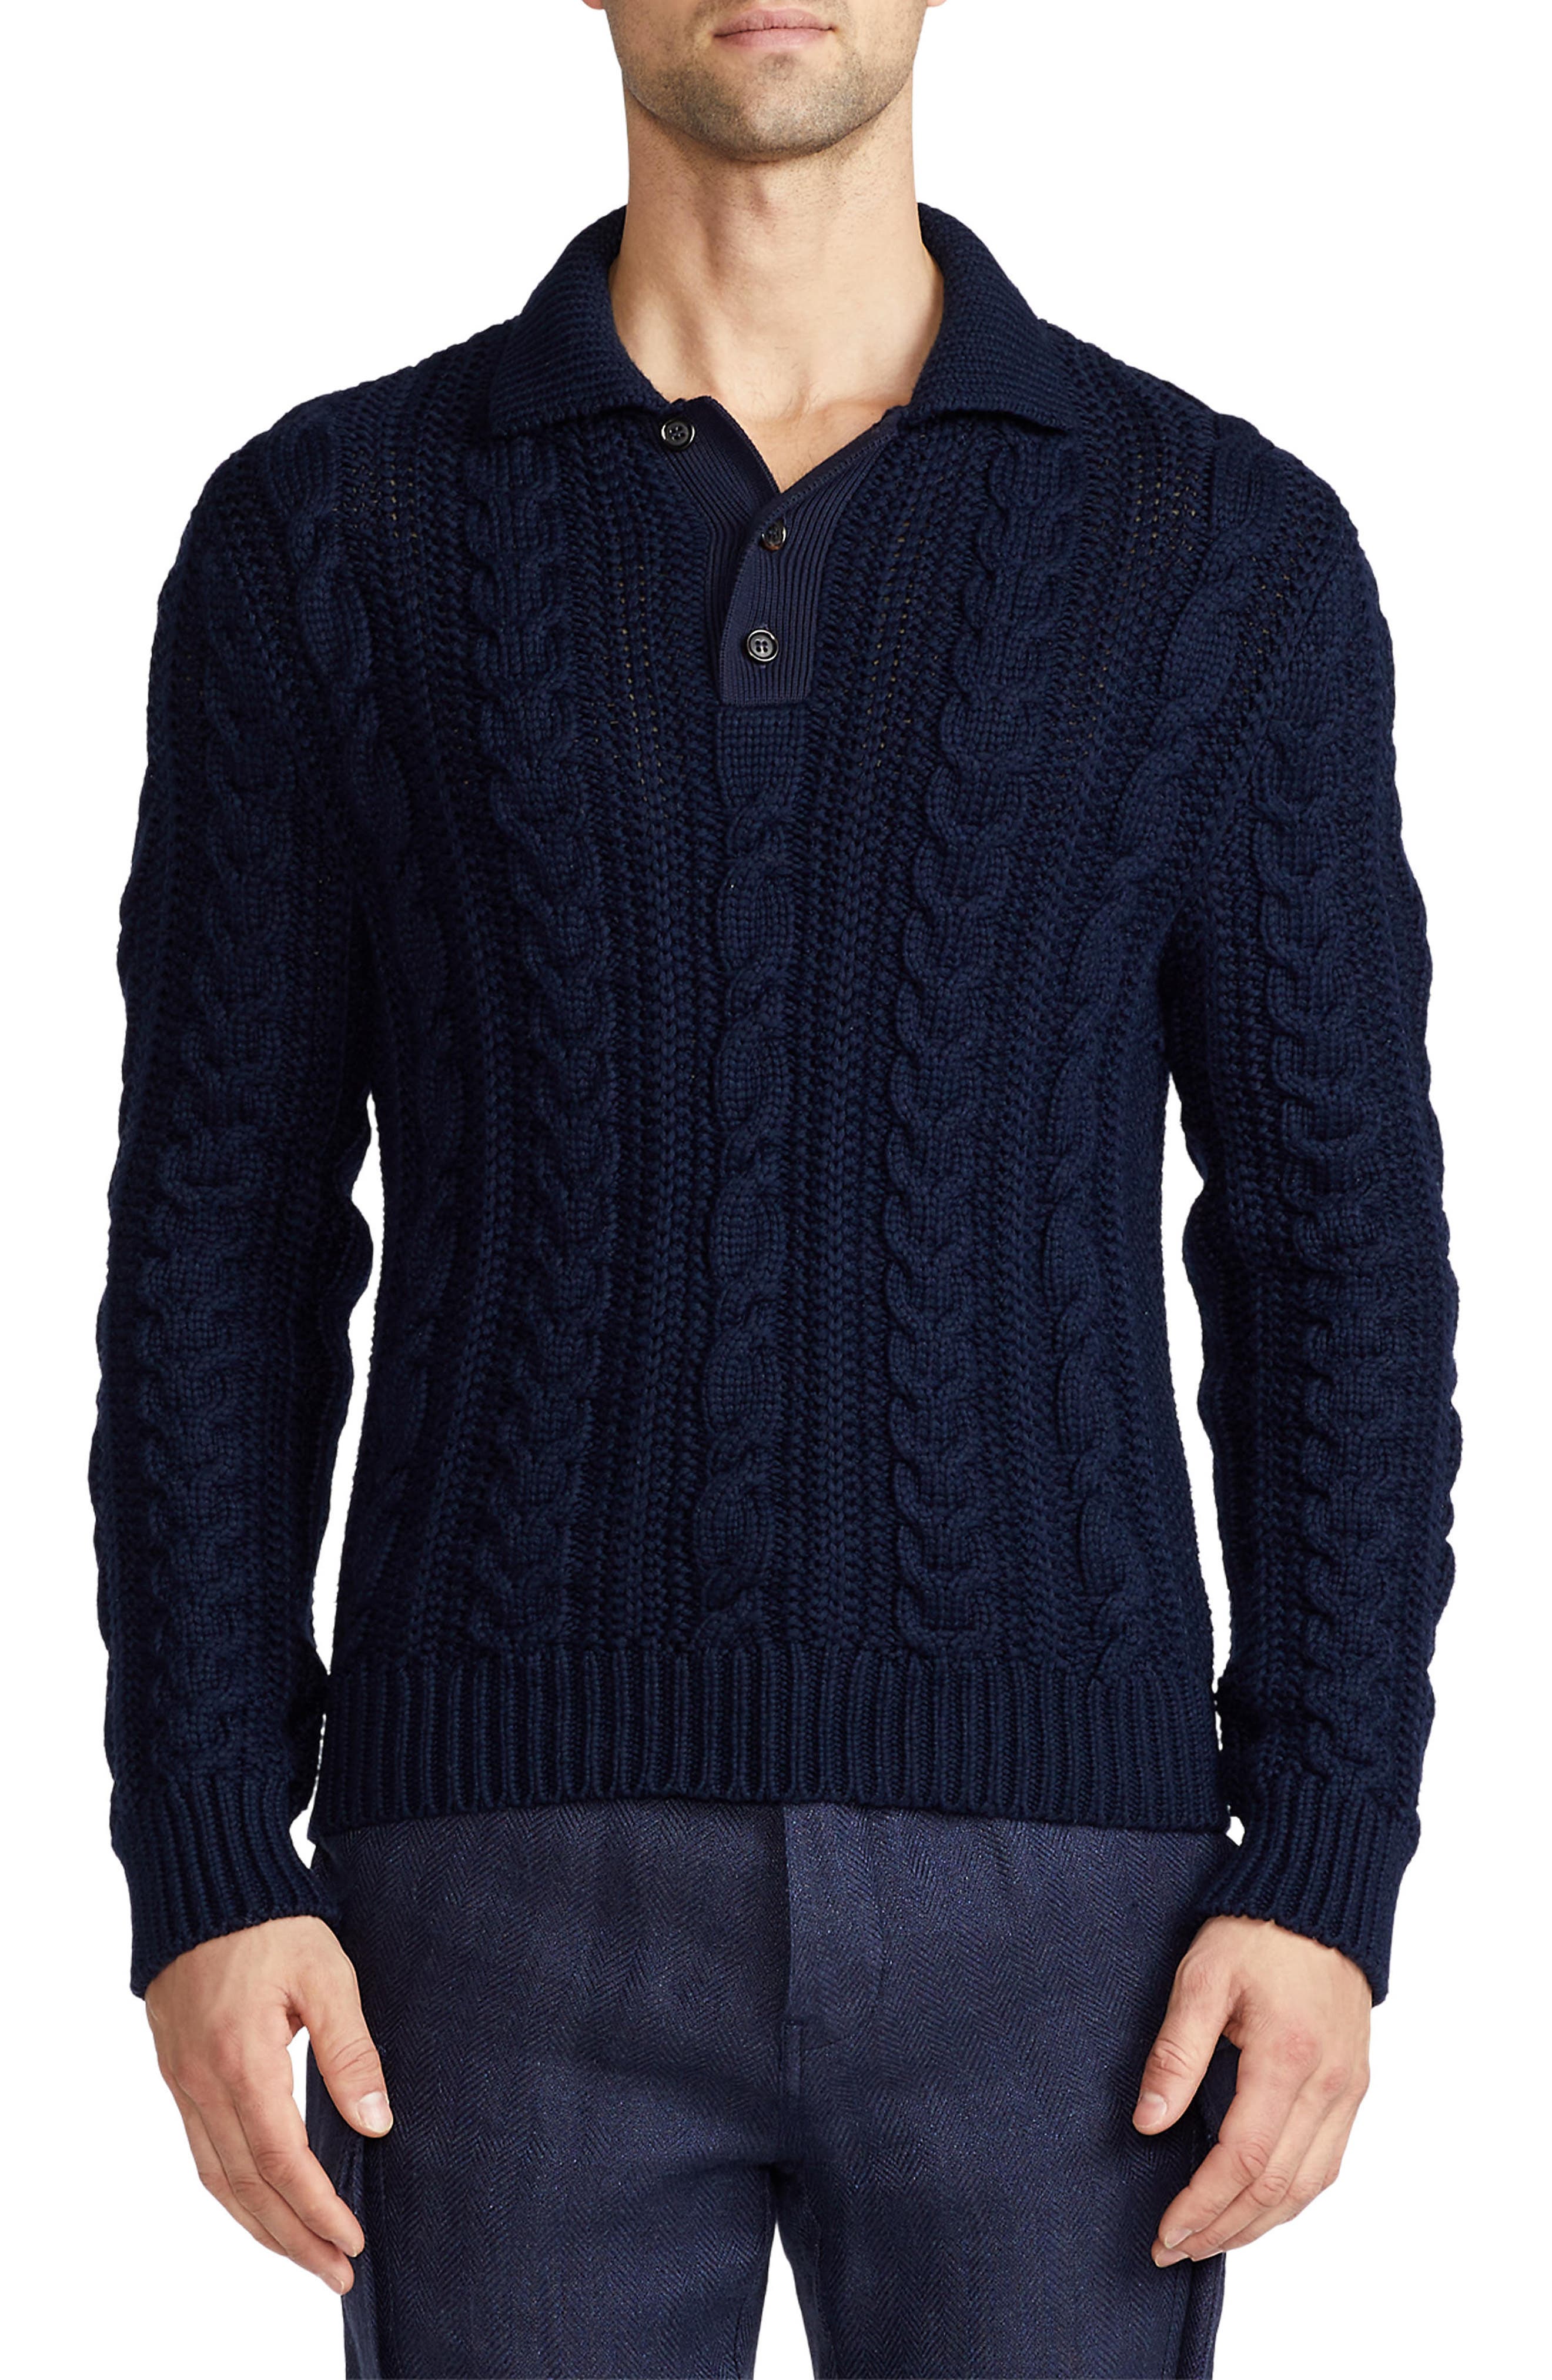 Mens New Cable Knit Jacquard Long Sleeve Pullover Jumper Sweater S to XL